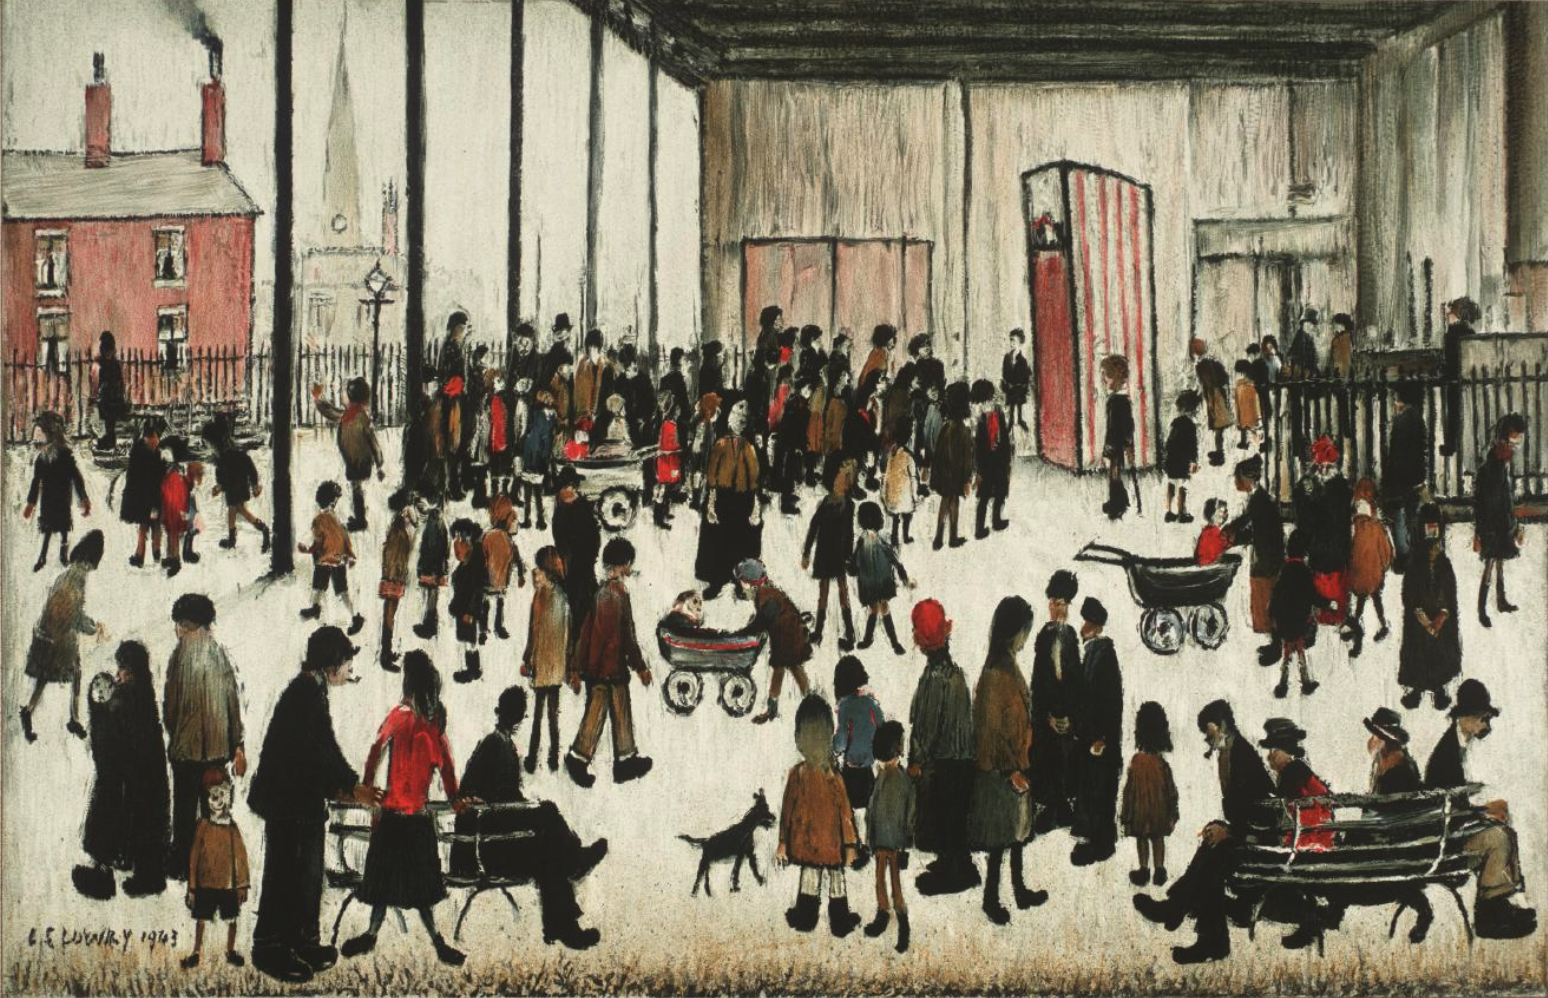 Punch and Judy (1943) by Laurence Stephen Lowry (1887 - 1976), English artist.